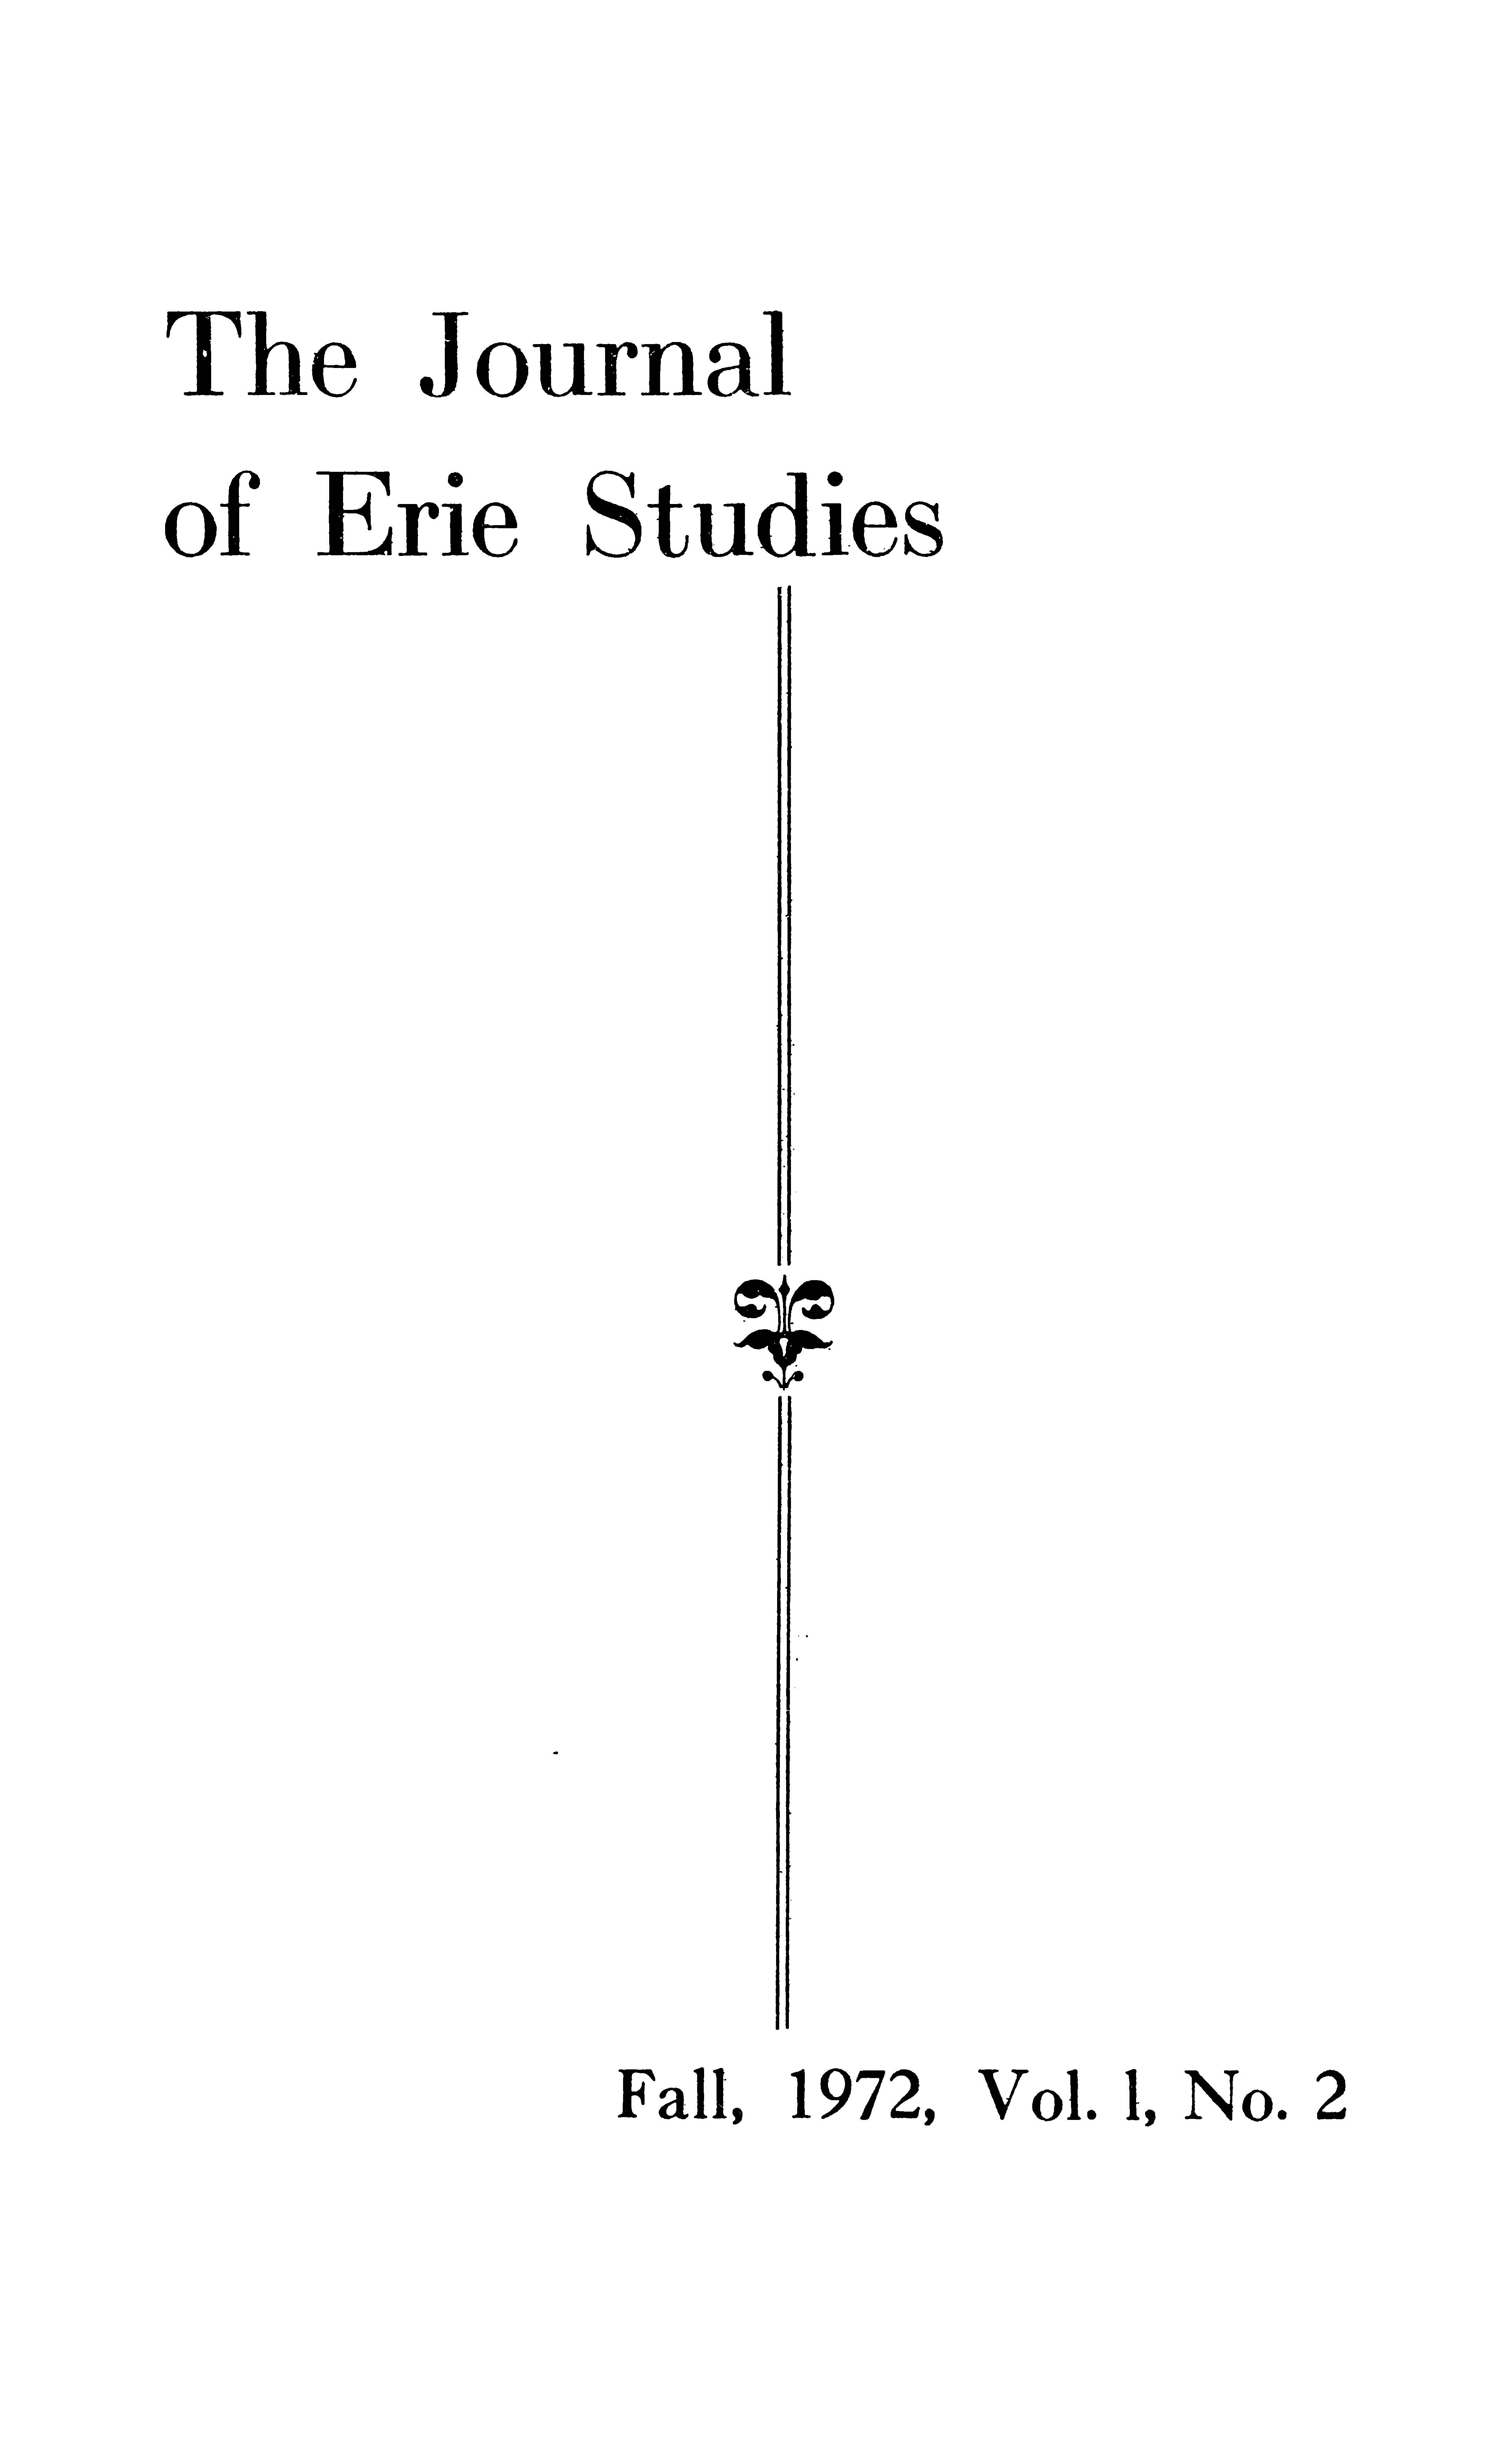 Cover of the fall 1972 issue of The Journal of Erie Studies.